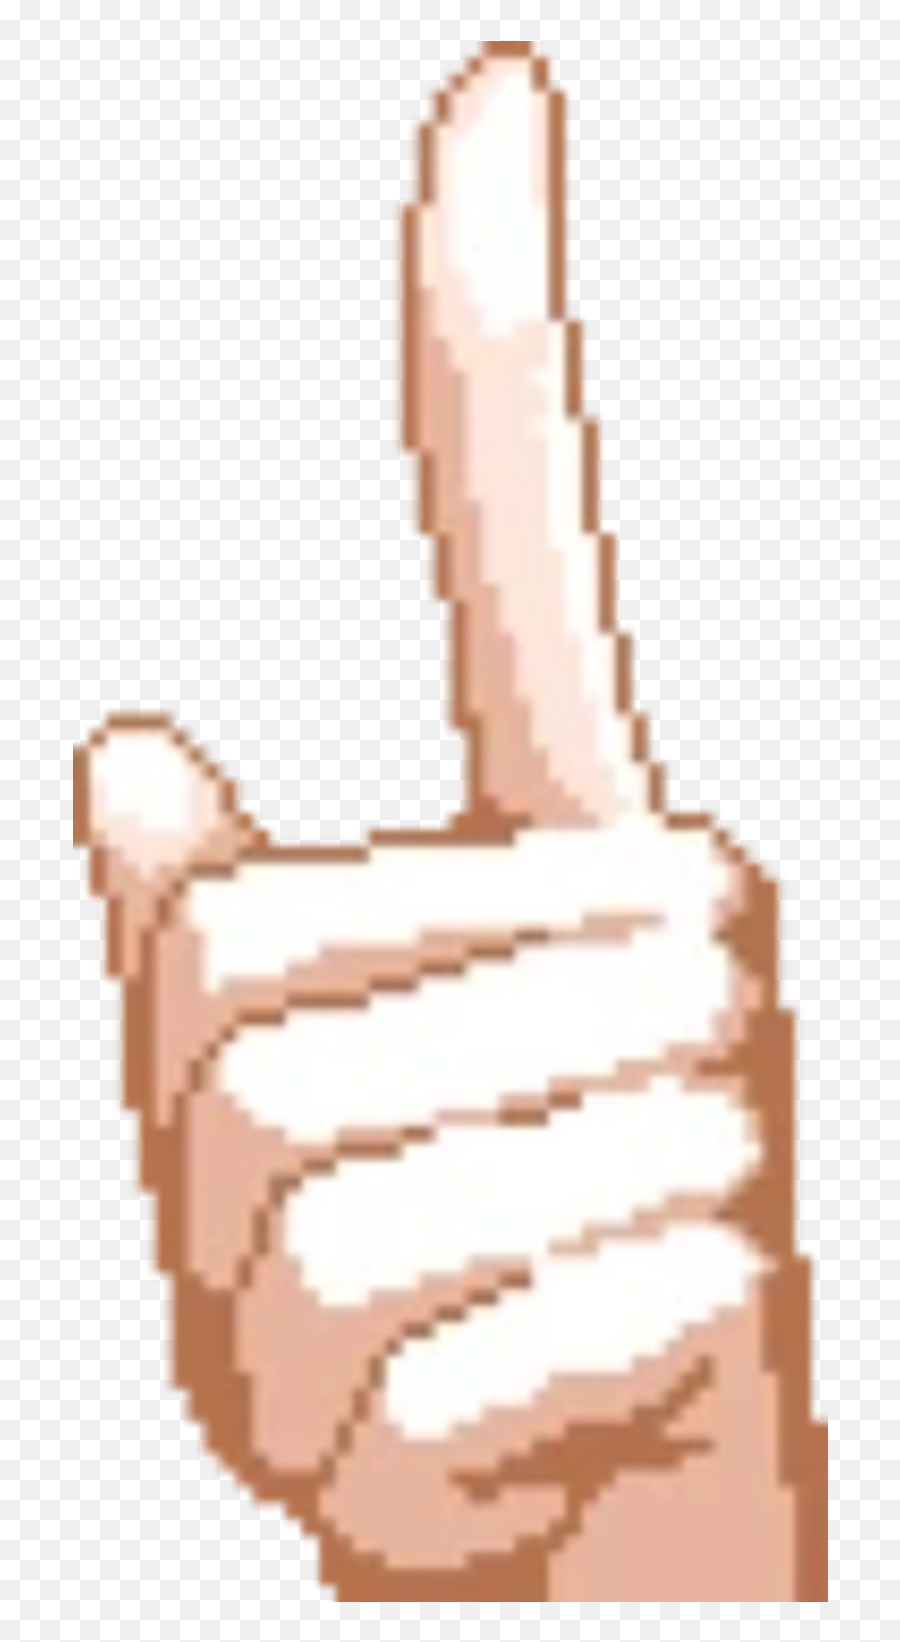 Guess The Yttd Characters By Their Hands Level Three Hard Emoji,Hand 2 Finger Emoji